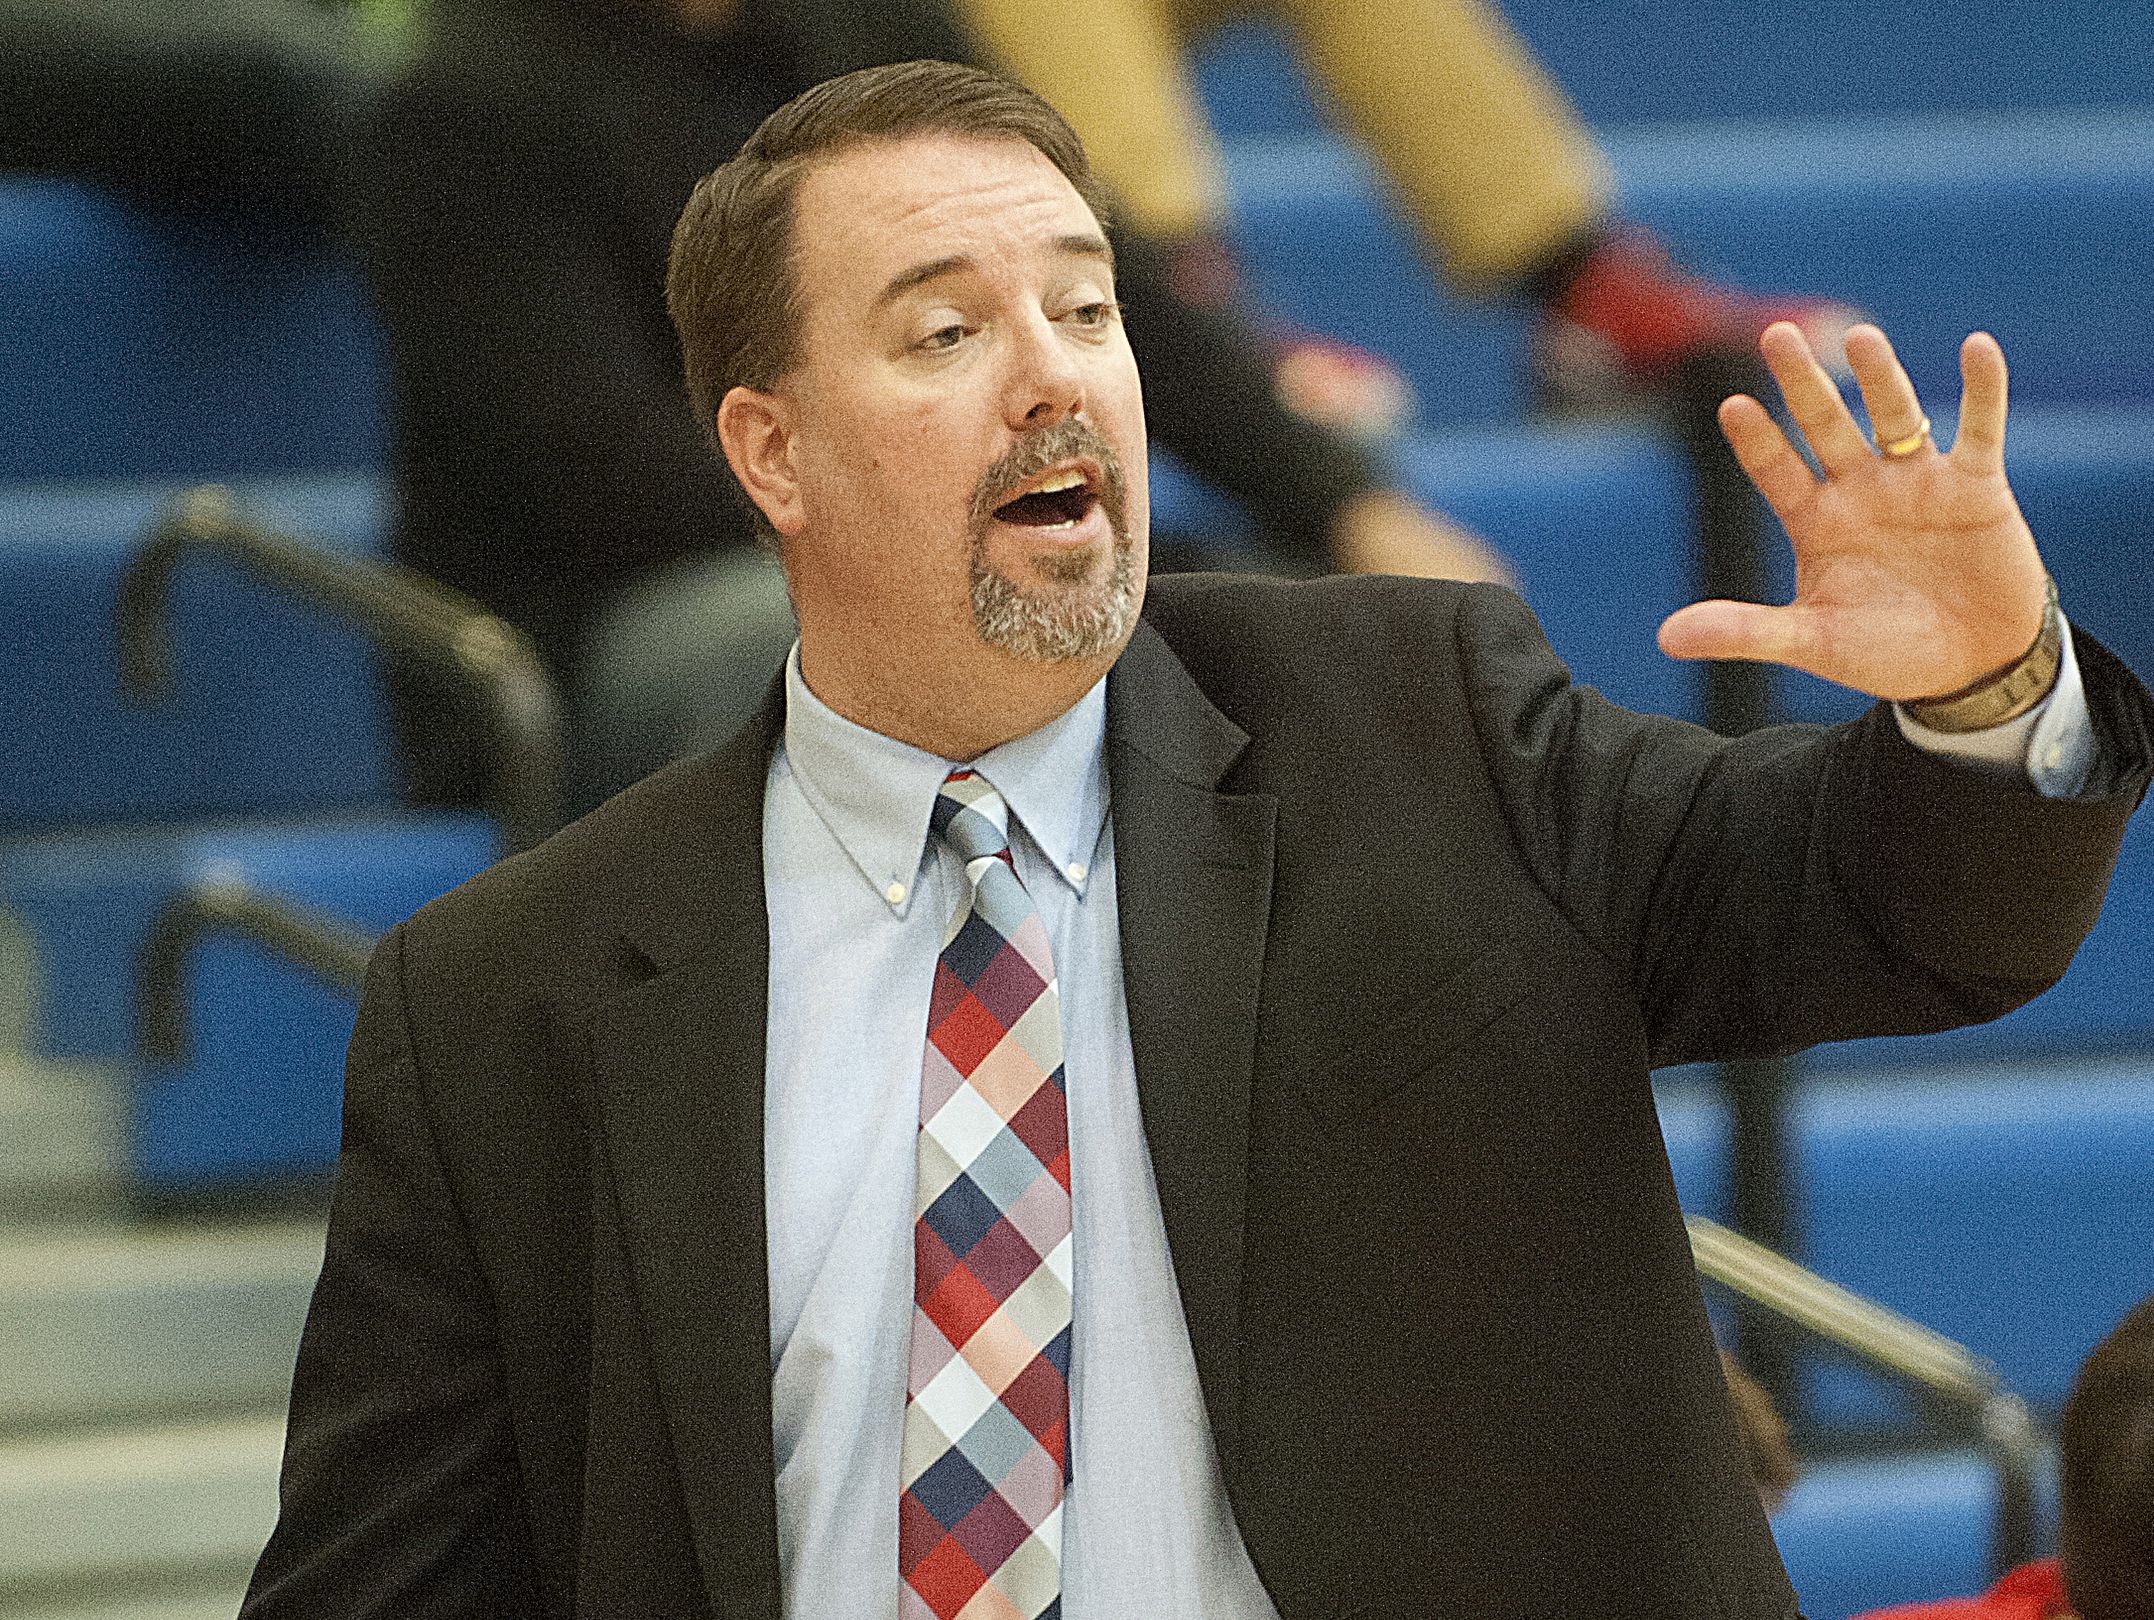 Christian Academy of Louisville Centurians head basketball coach Chad T. Carr shouts instructions to his team during the game in the first round of the boys' Louisville Invitational Tournament. 12 January 2015